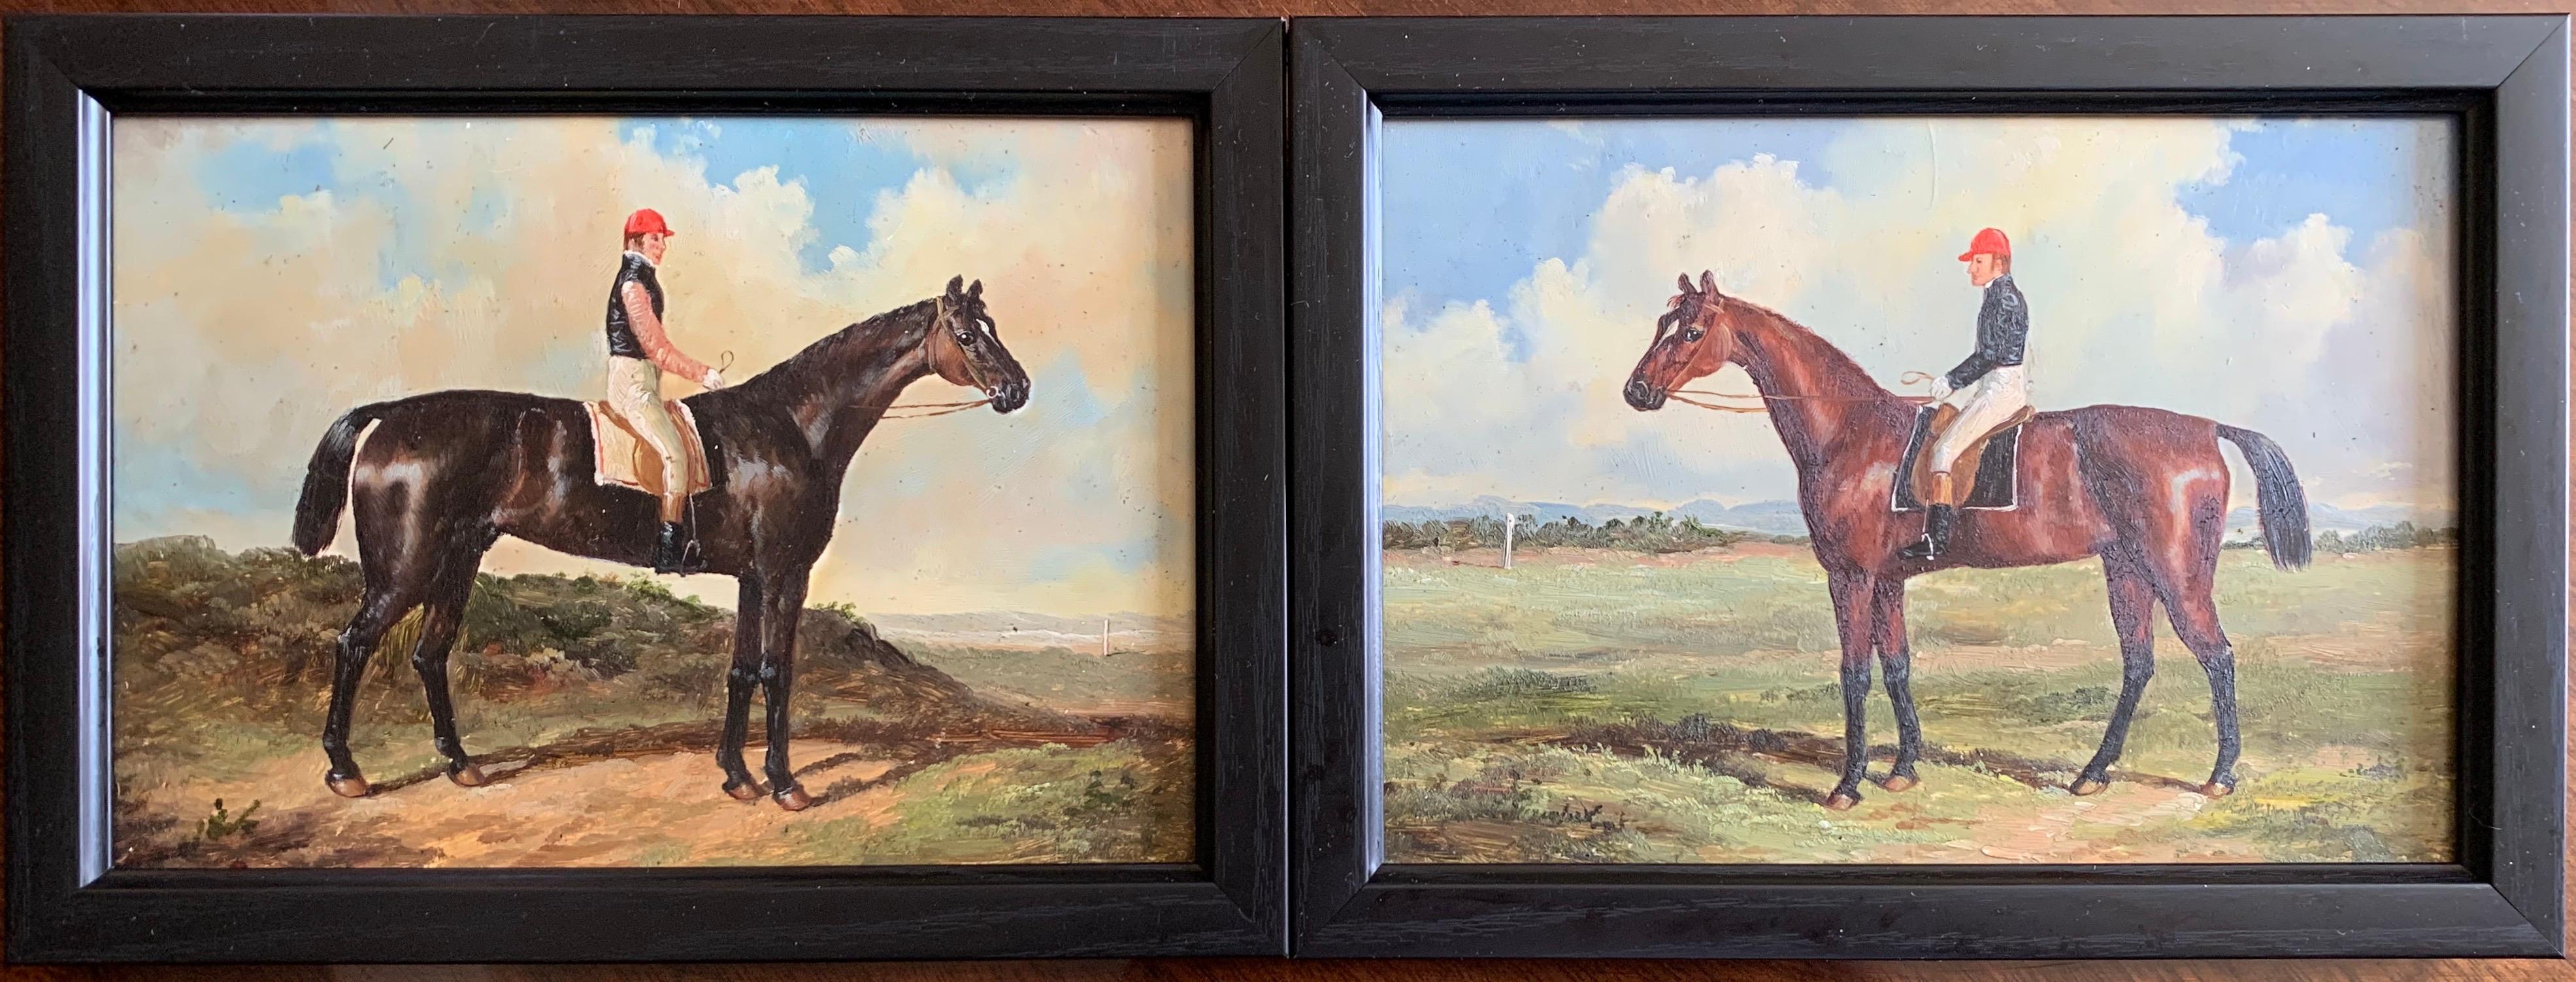 Unknown Landscape Painting - Racehorses with Jockeys Up - Pair of English Classic Racehorse Oil Paintings